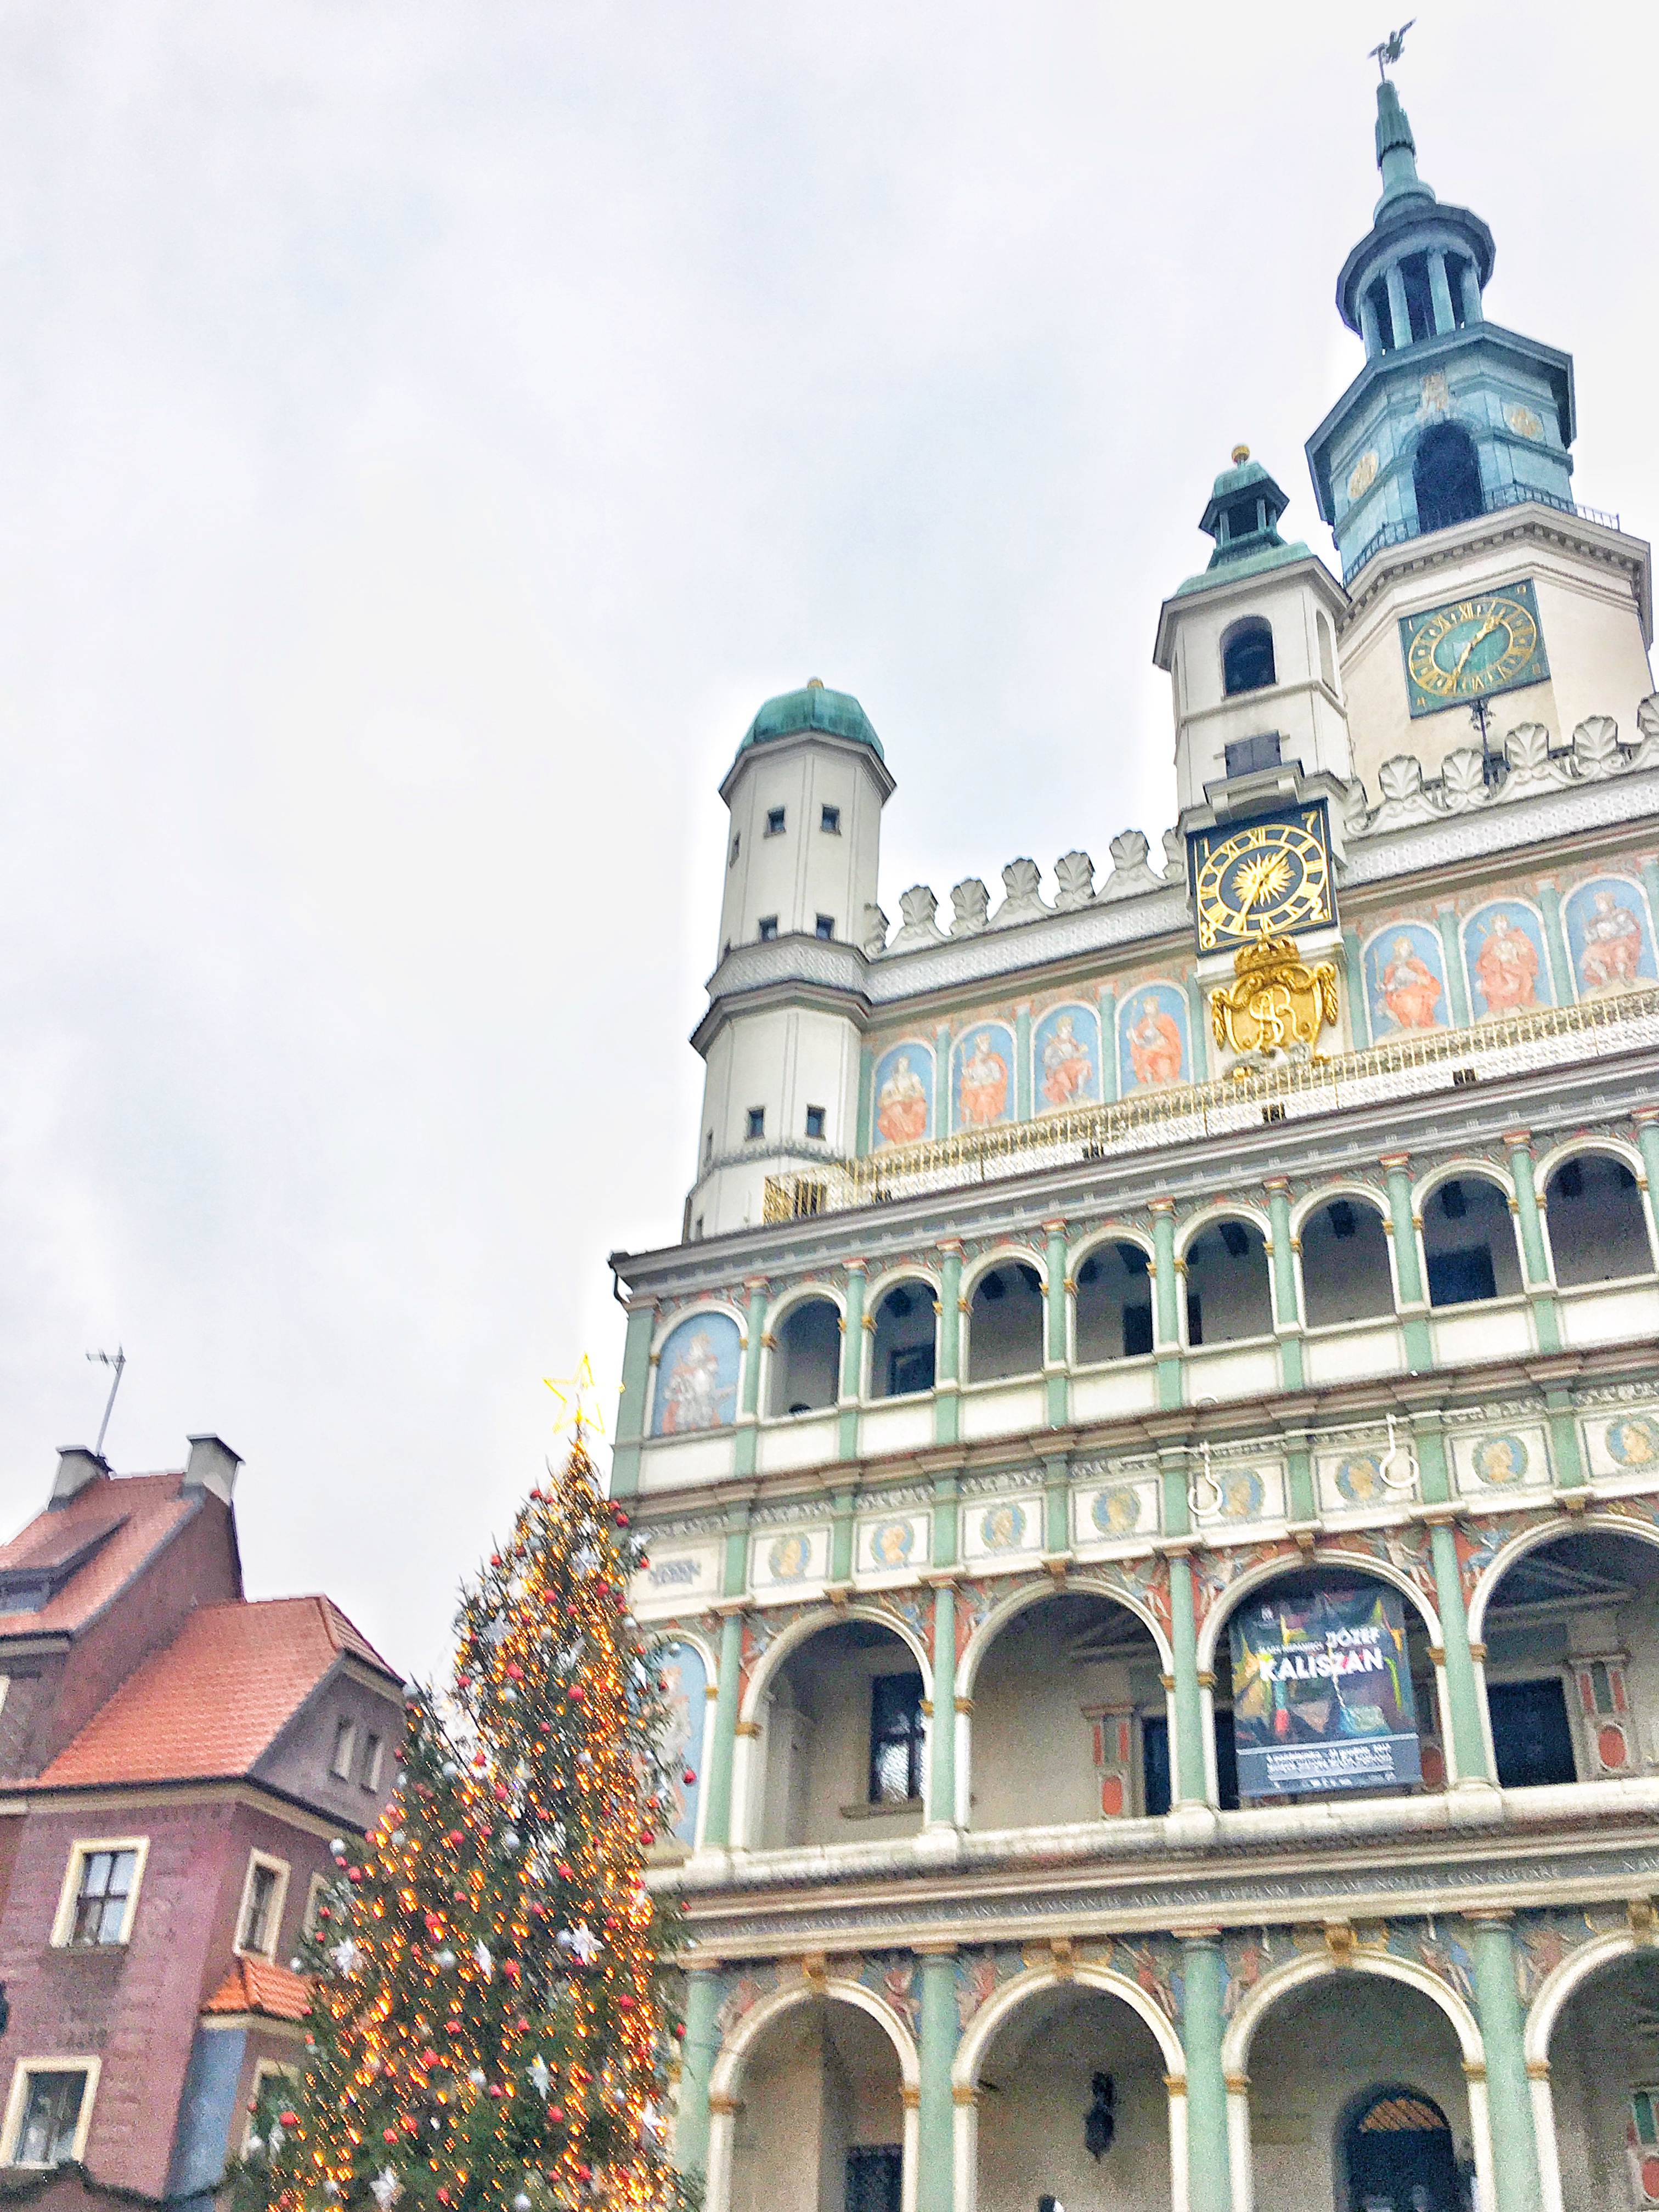 Renaissance town hall in Poznan